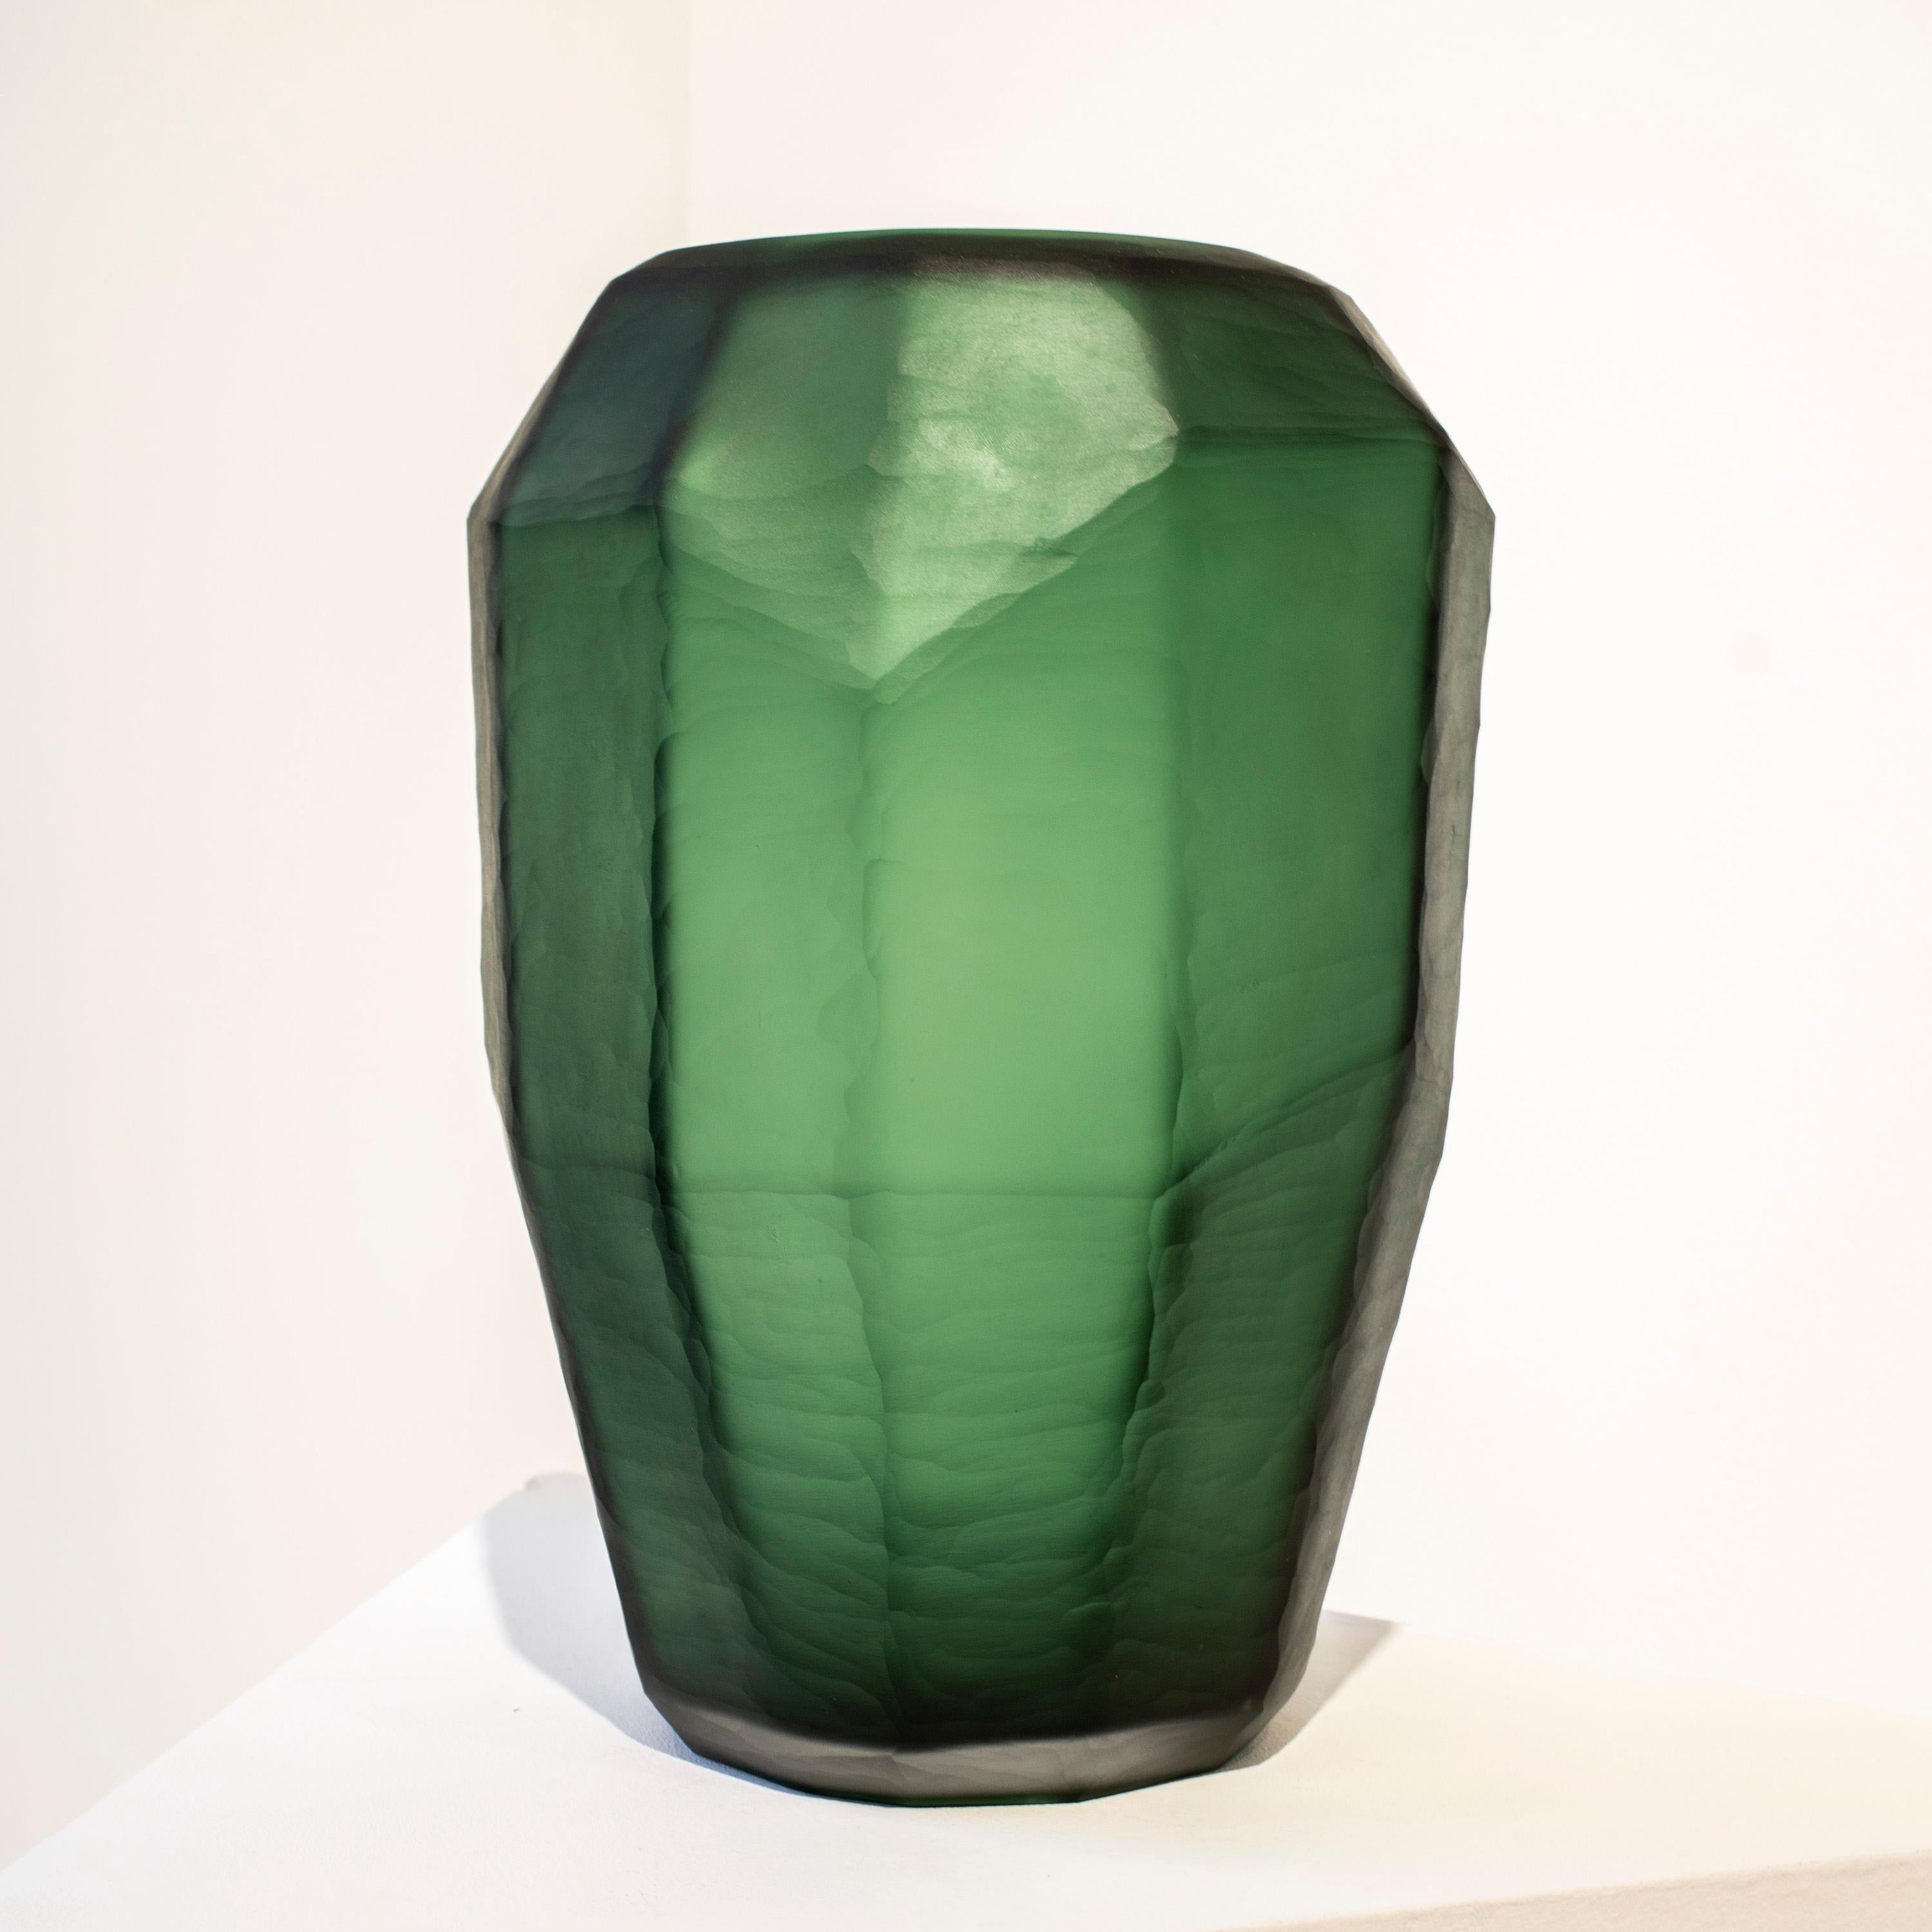 Italian green translucid glass vase, with faceted polygonal shape and a matted finish. 